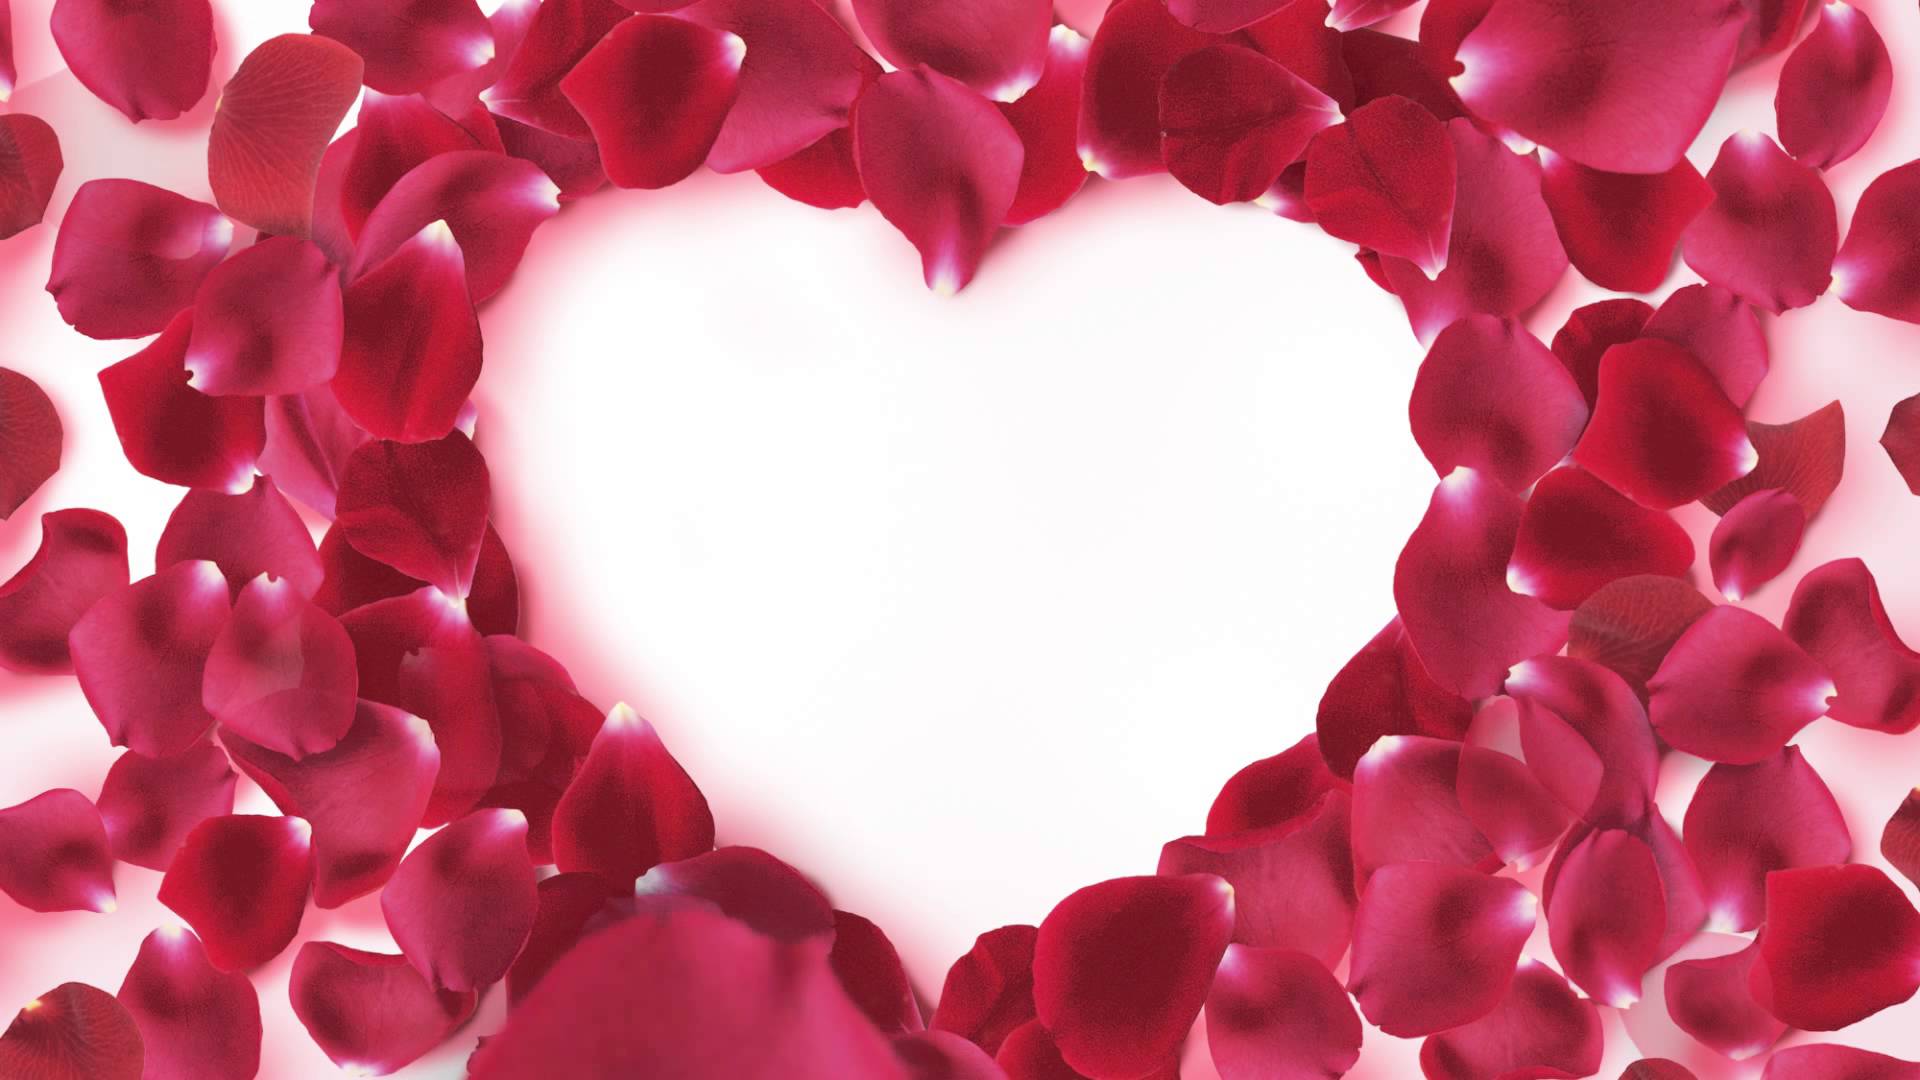 Footage Background Rose Petals Heart Frame - YouTube